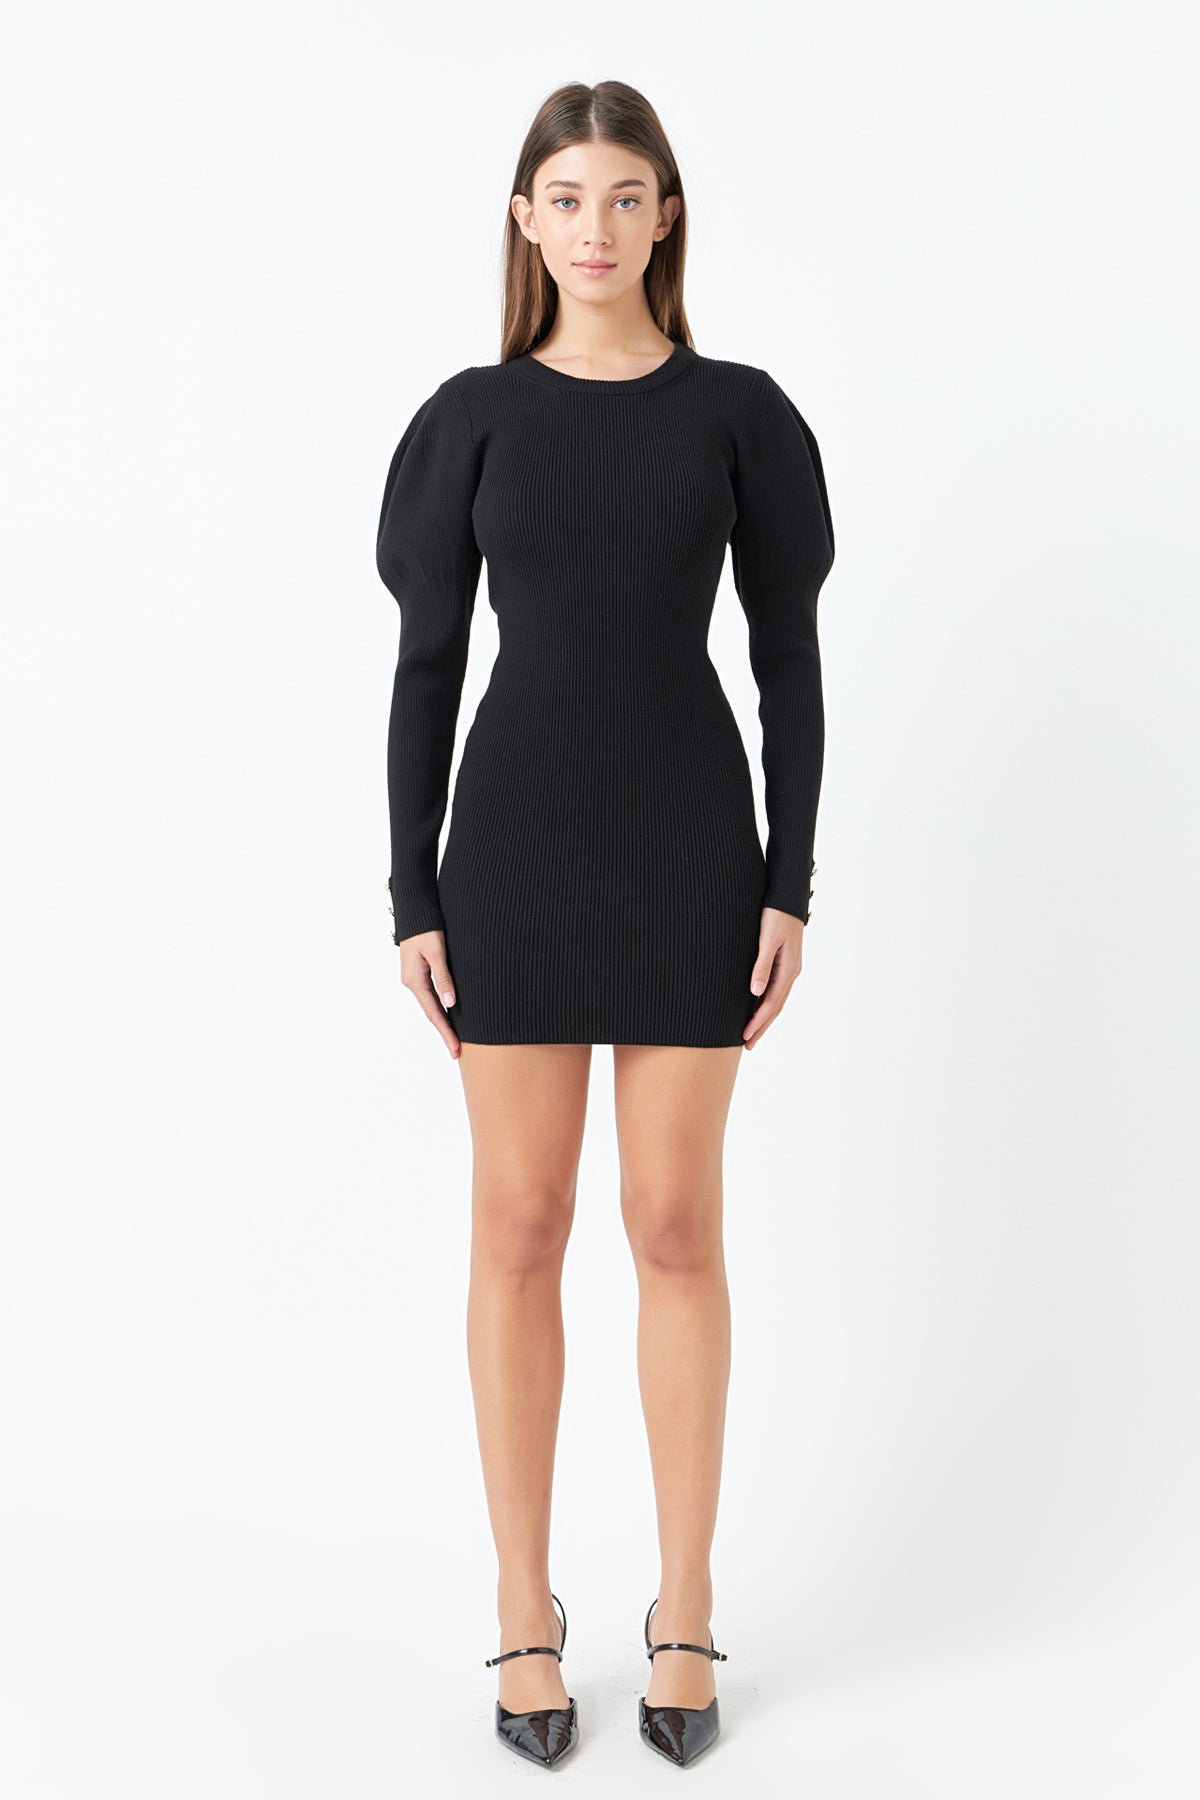 ENDLESS ROSE - Puff Sleeve Knit Dress - DRESSES available at Objectrare